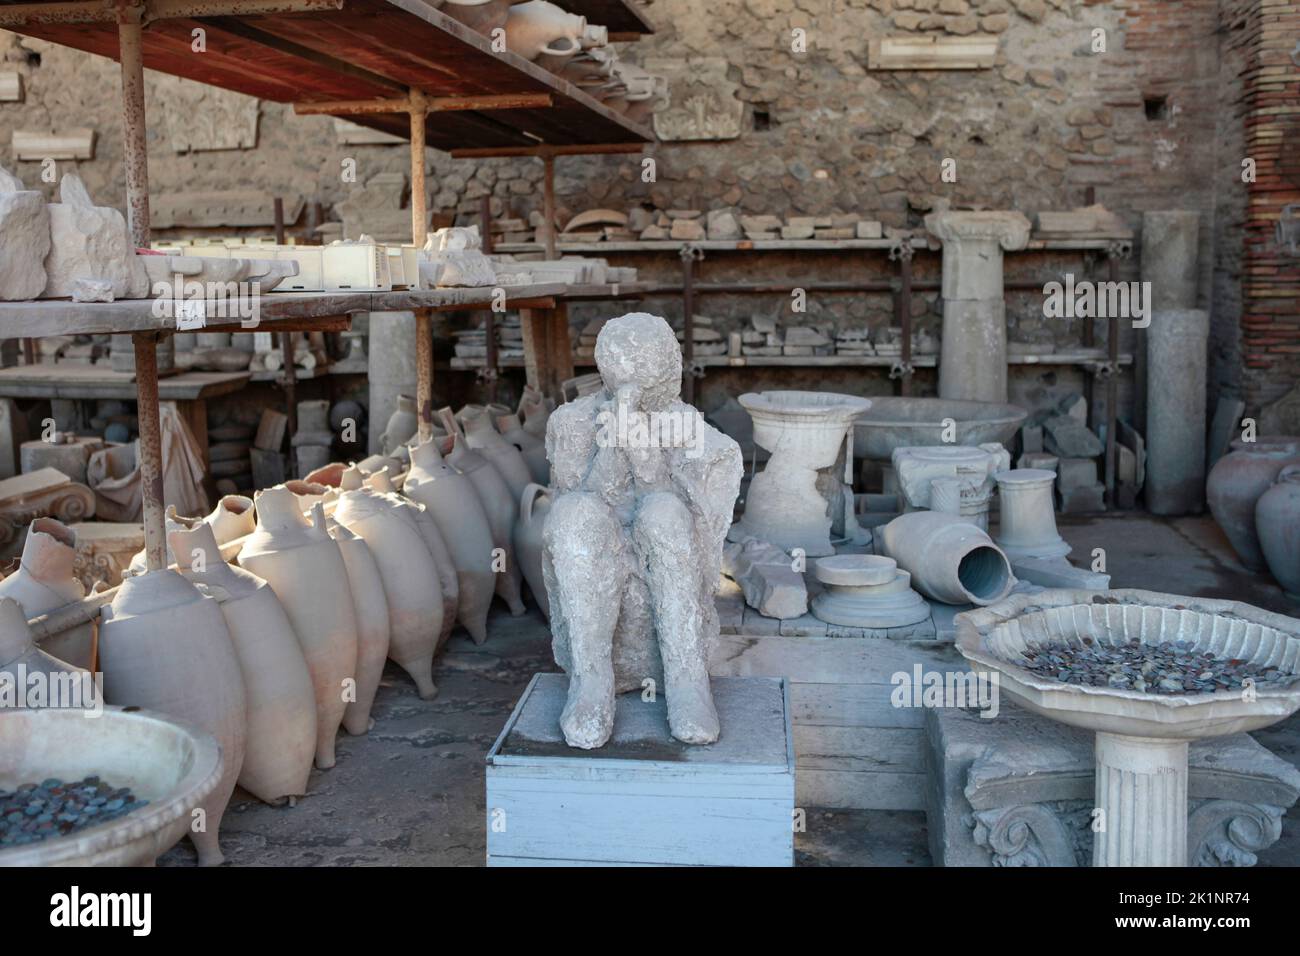 amphorae, artefacts and a cast of a body at Pompeii, in the storage area of artefacts found at the archaeological site Stock Photo